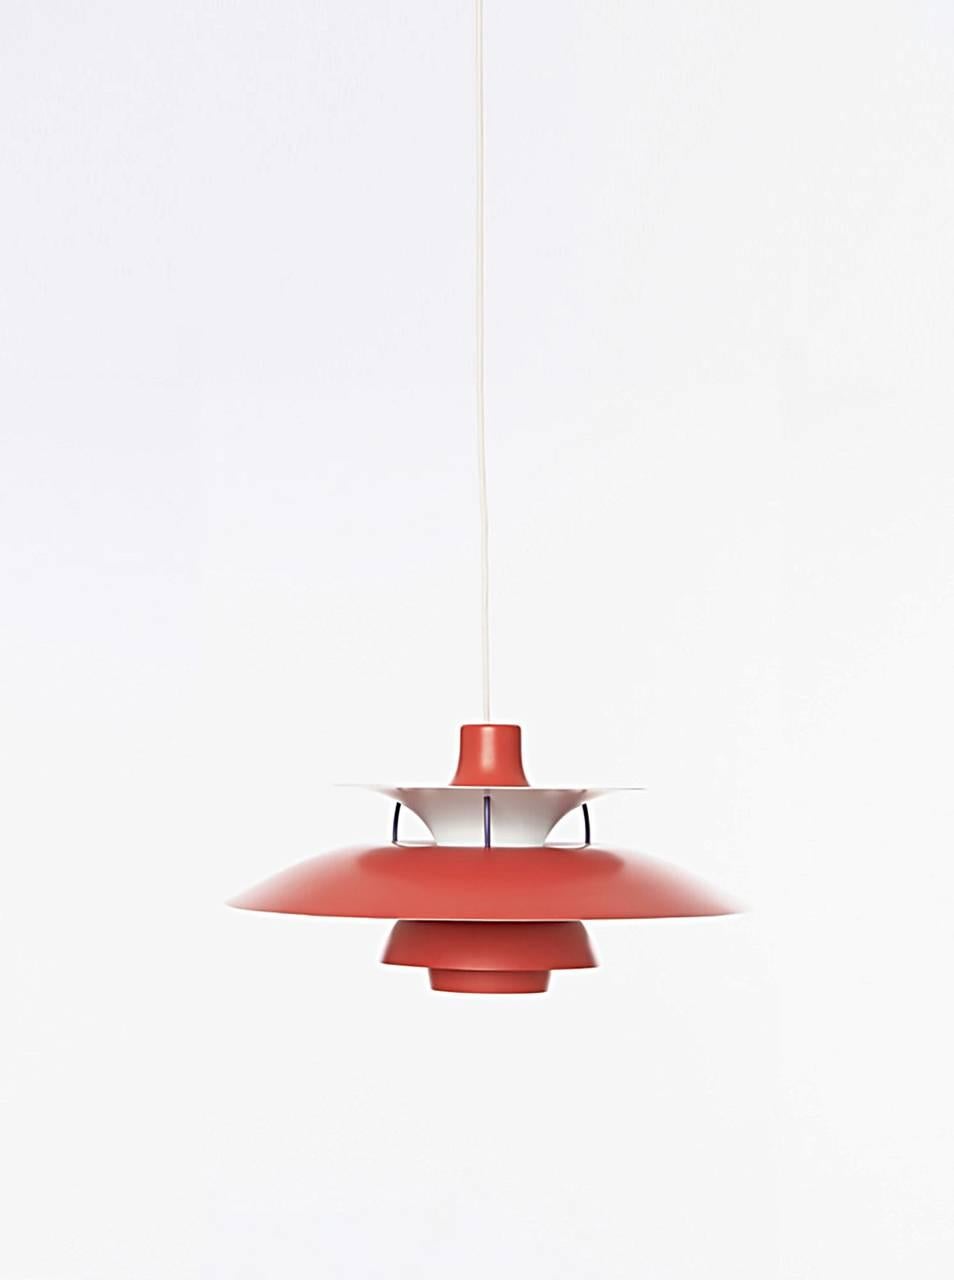 A vintage PH5 hanging lamp designed by Poul Henningsen for Louis Poulsen. First manufactured in 1957 for Louis Poulsen, this striking vintage PH5 pendant is one of the most recognizable designs by Poul Henningsen. Original red color finish with blue